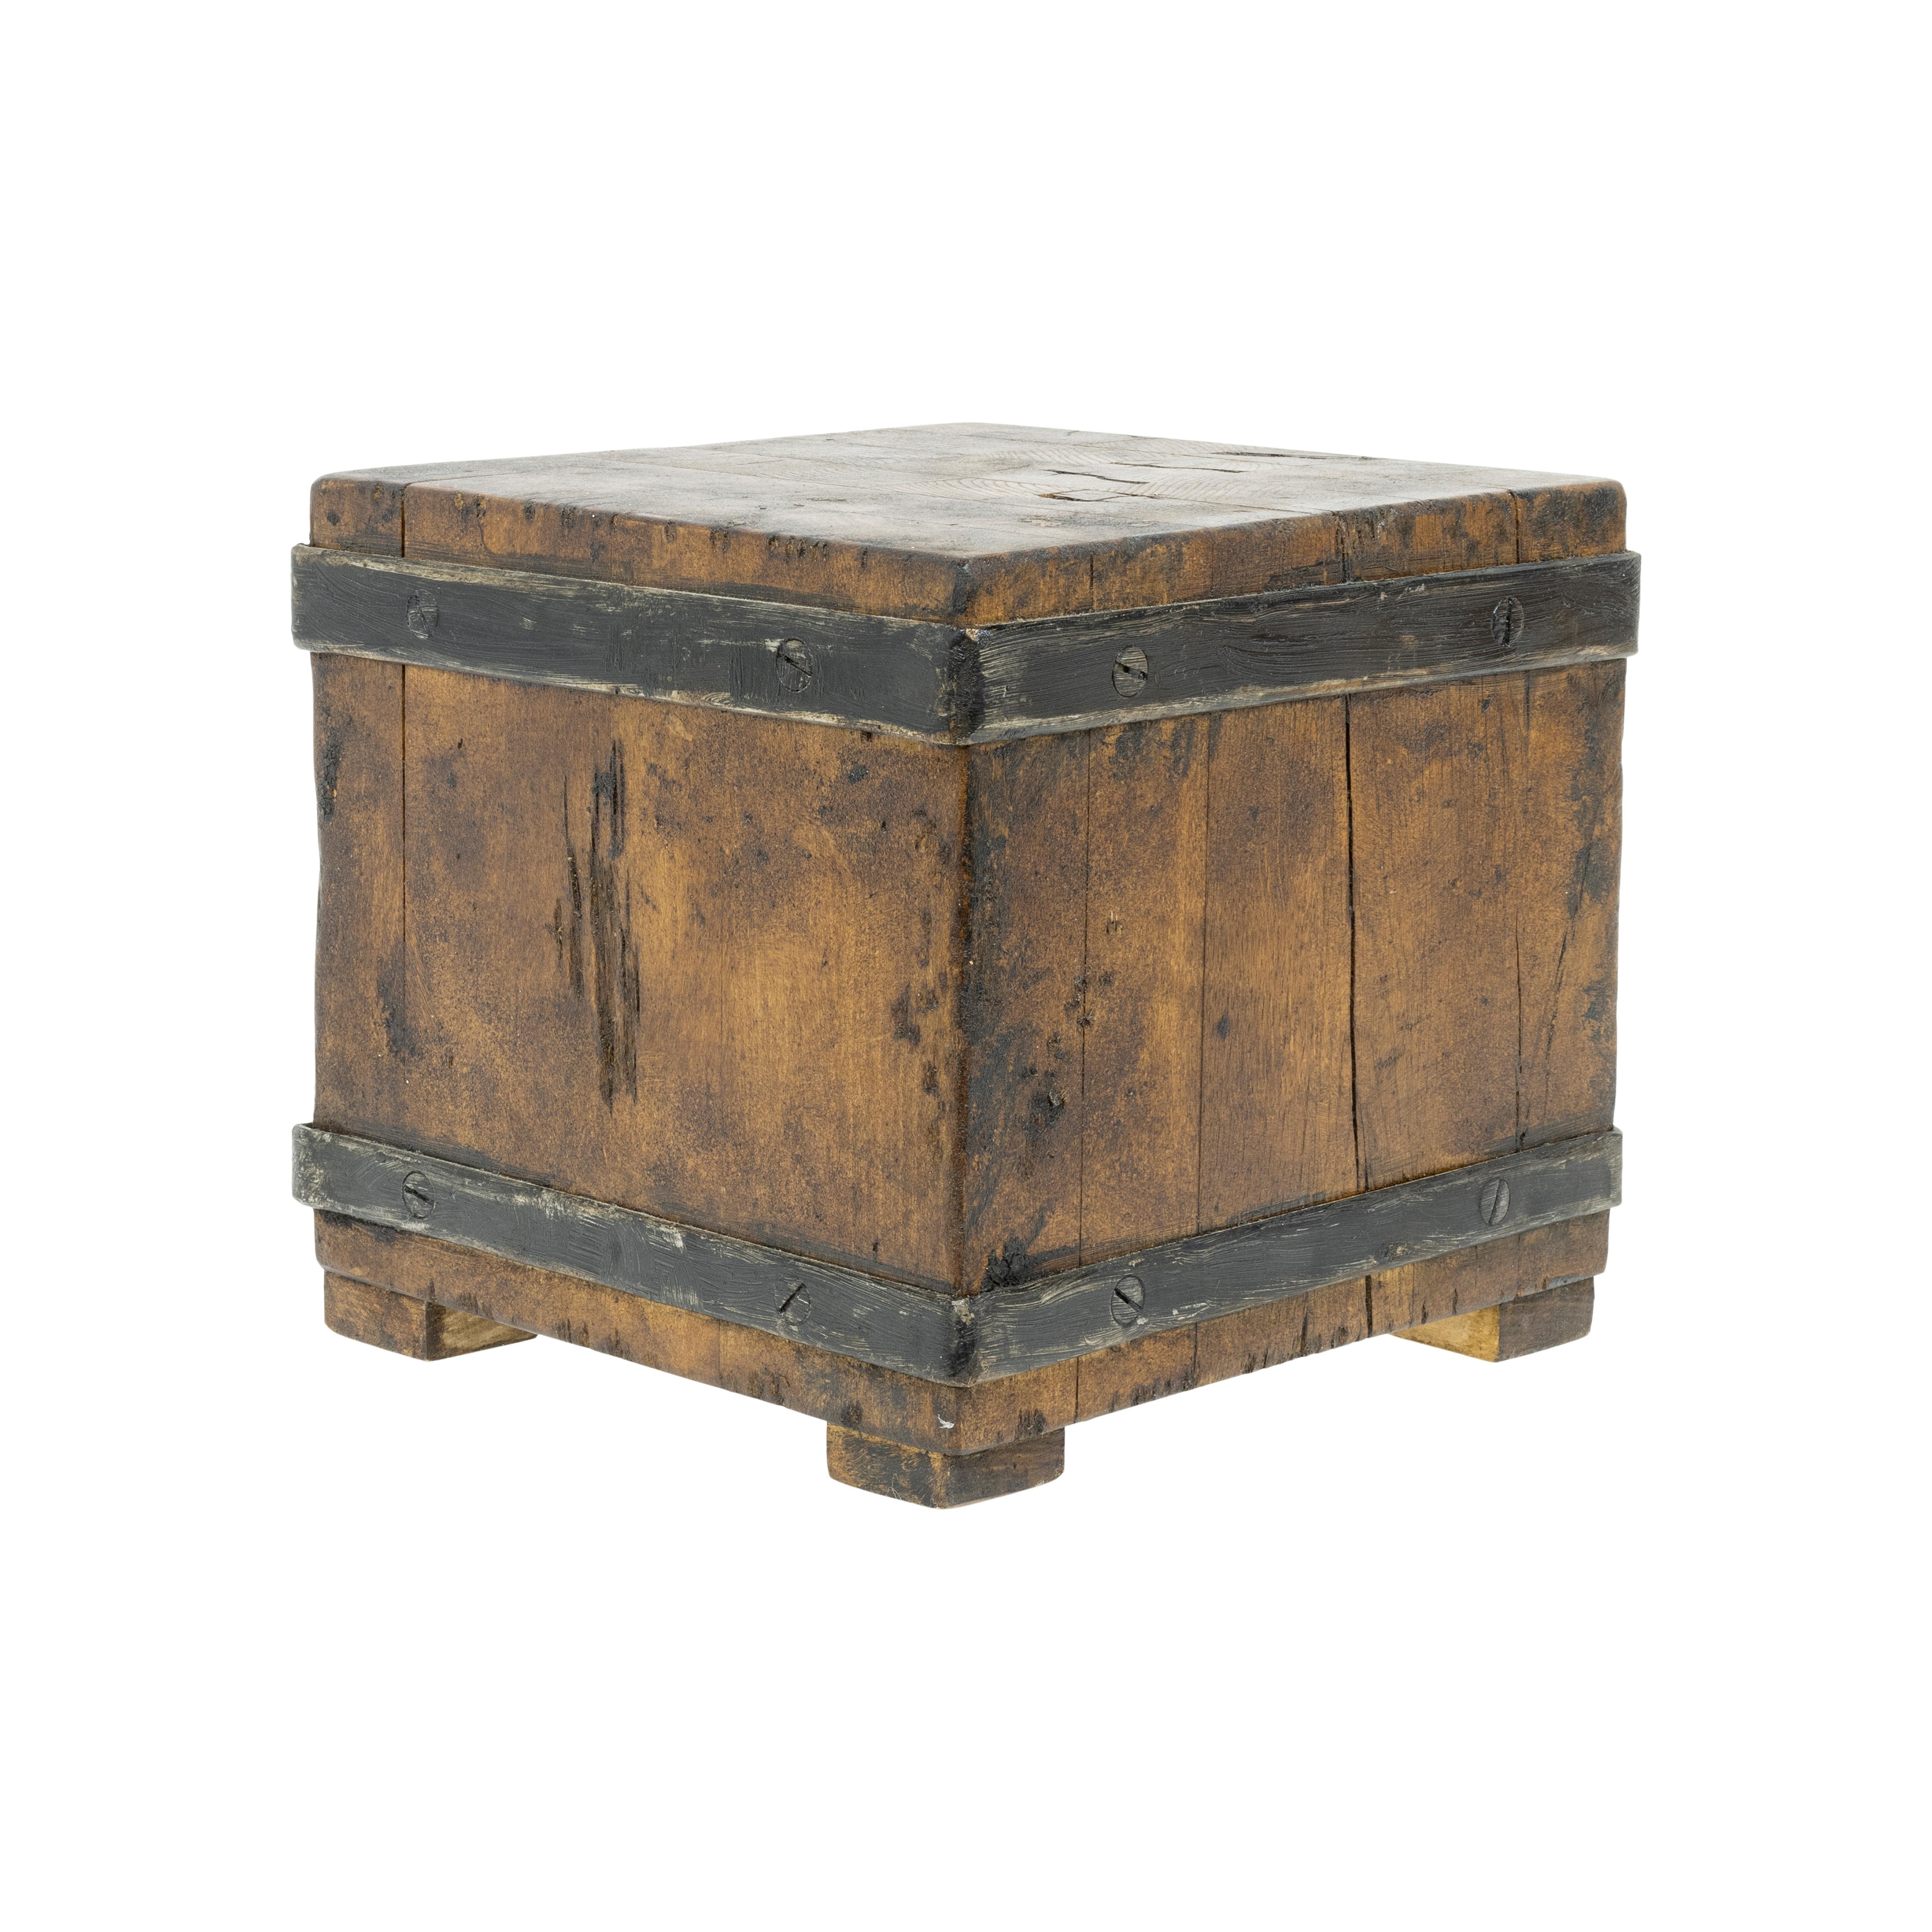 Primitive 19th Century Tabletop Butcher Block In Good Condition For Sale In Coeur d'Alene, ID